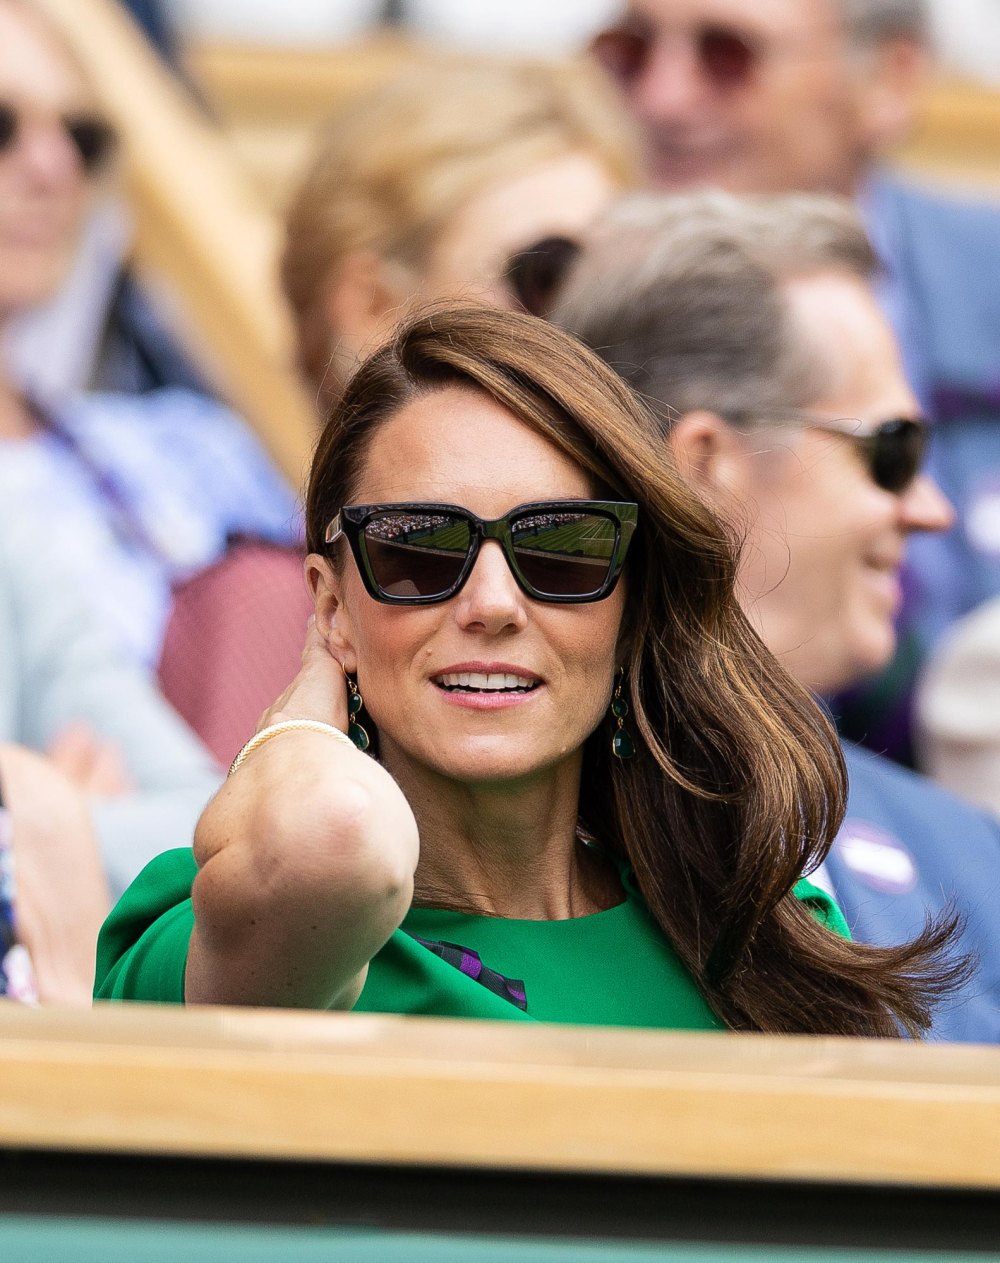 All About Kate Middleton's Sunglasses That Sold Out Within 24 Hours